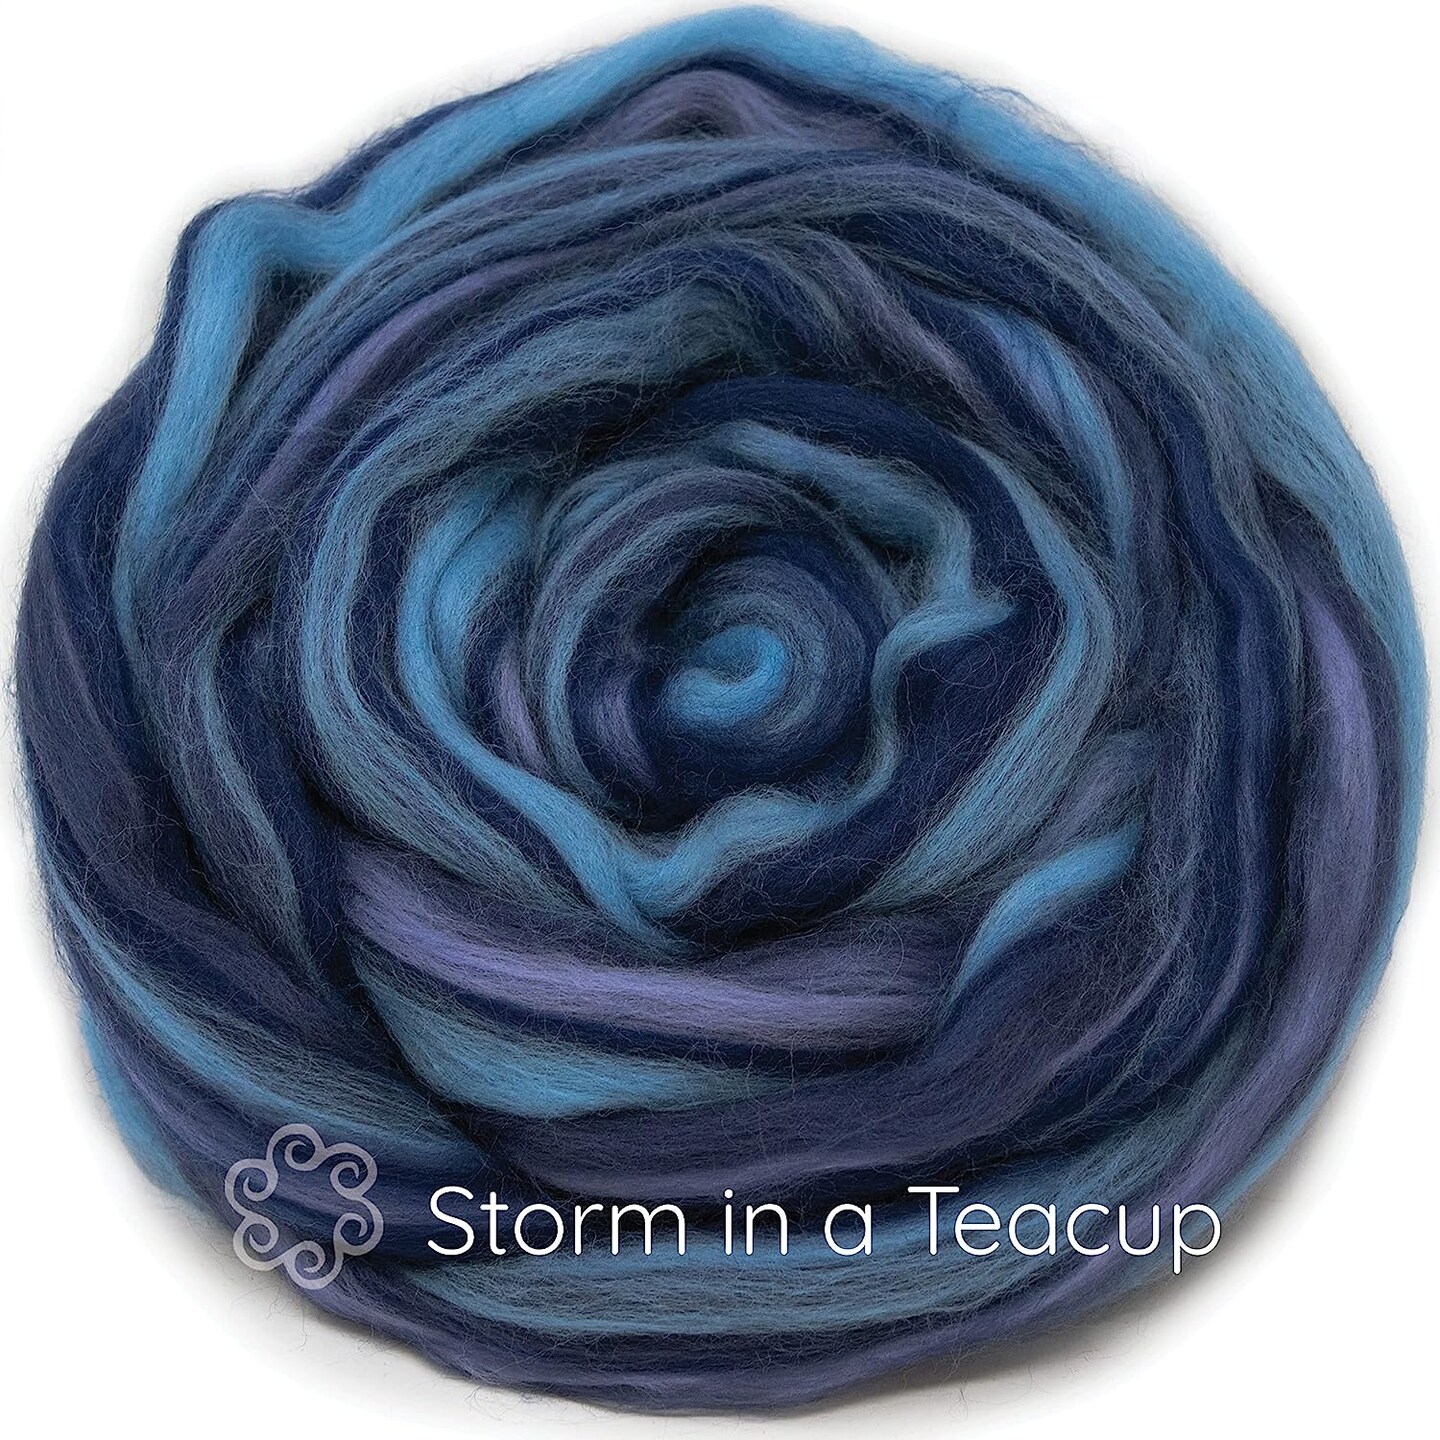 Mixed Merino Wool Variety Pack, Perfect Roving For Spinning, Felting &  Weaving, Spring Blossom